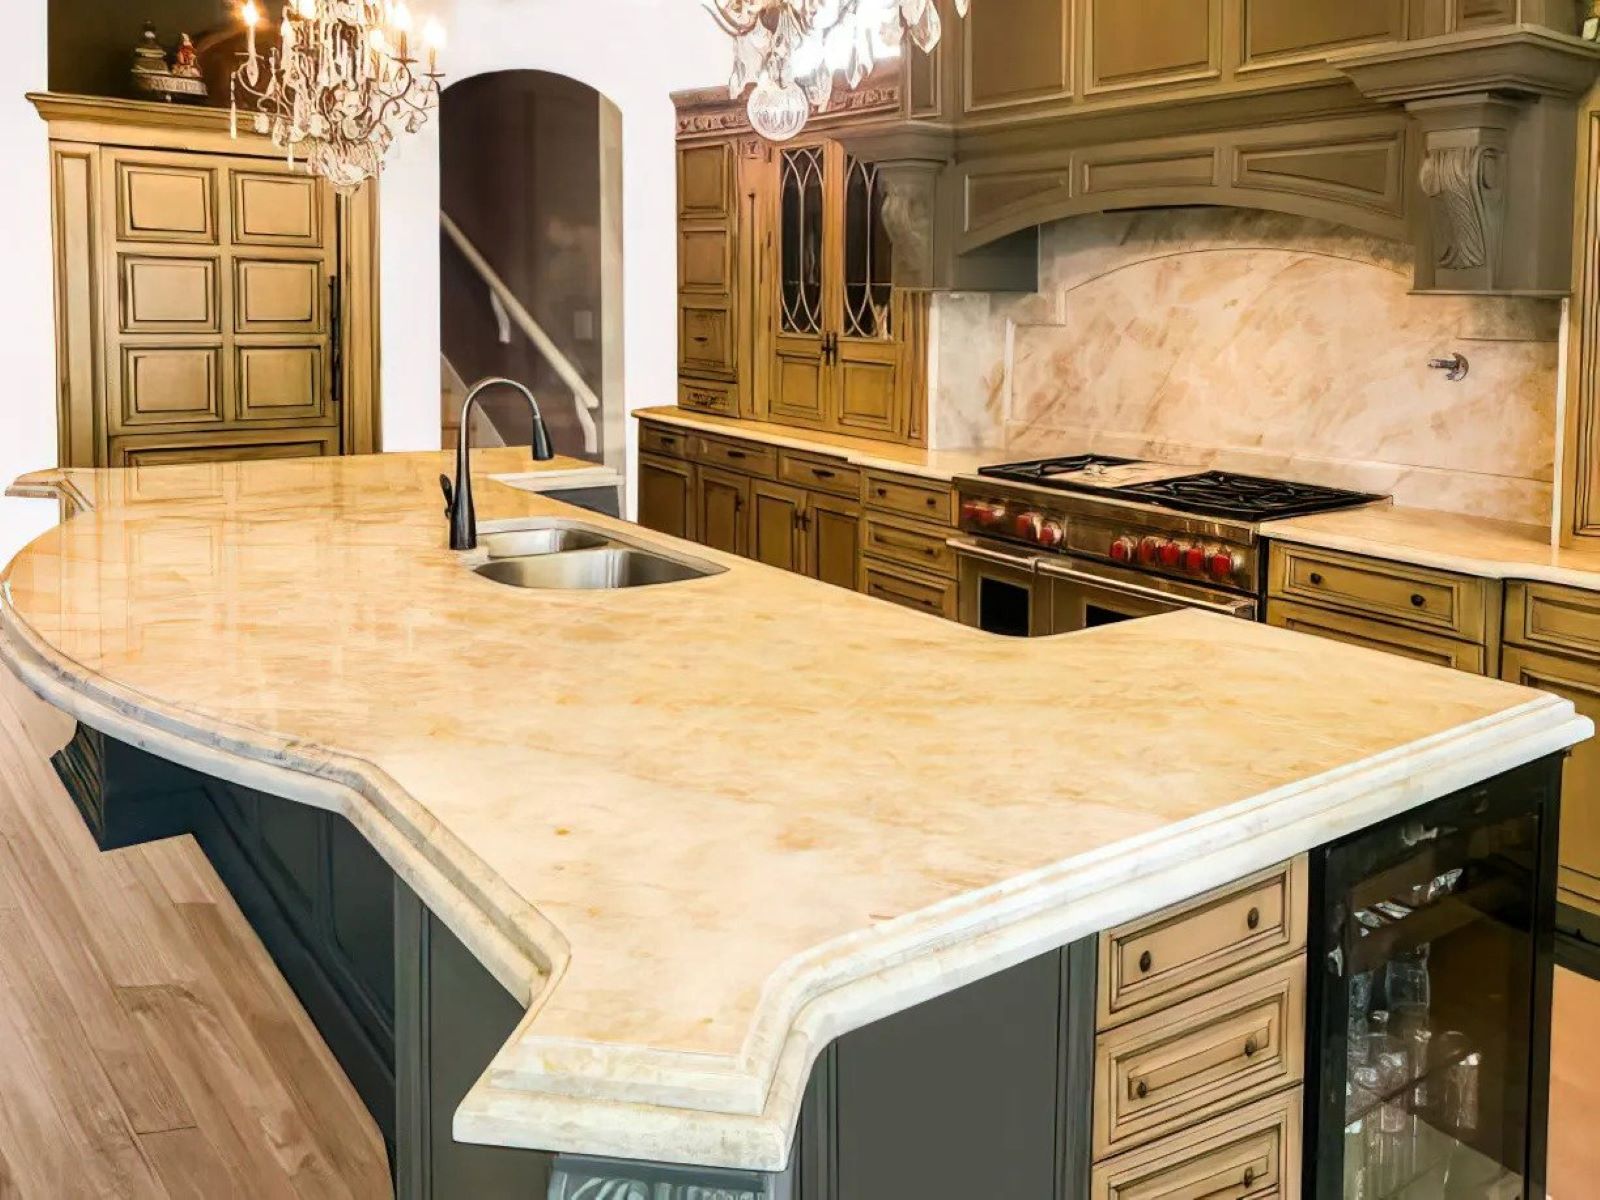 How To Care For Limestone Countertops